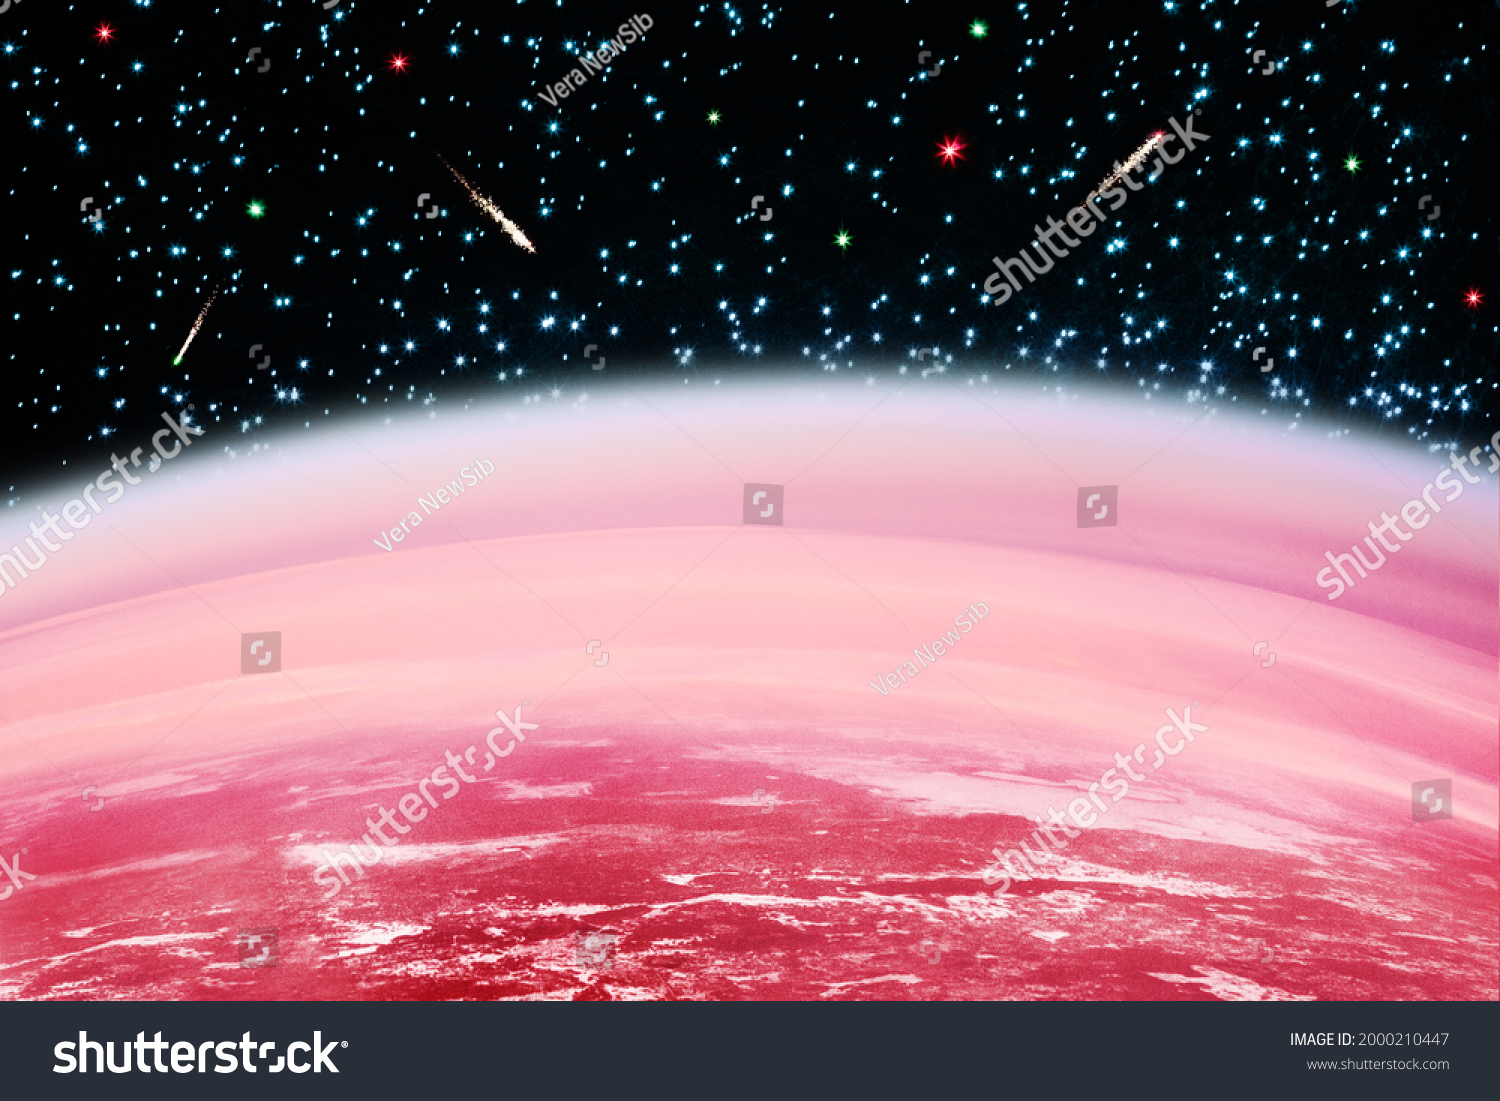 Cosmos landscape, red planet surface, dark black sky, bright shiny stars, flying comets, Mars horizon, celestial body, abstract alien galaxy, cosmic view, fantasy outer space illustration, universe #2000210447